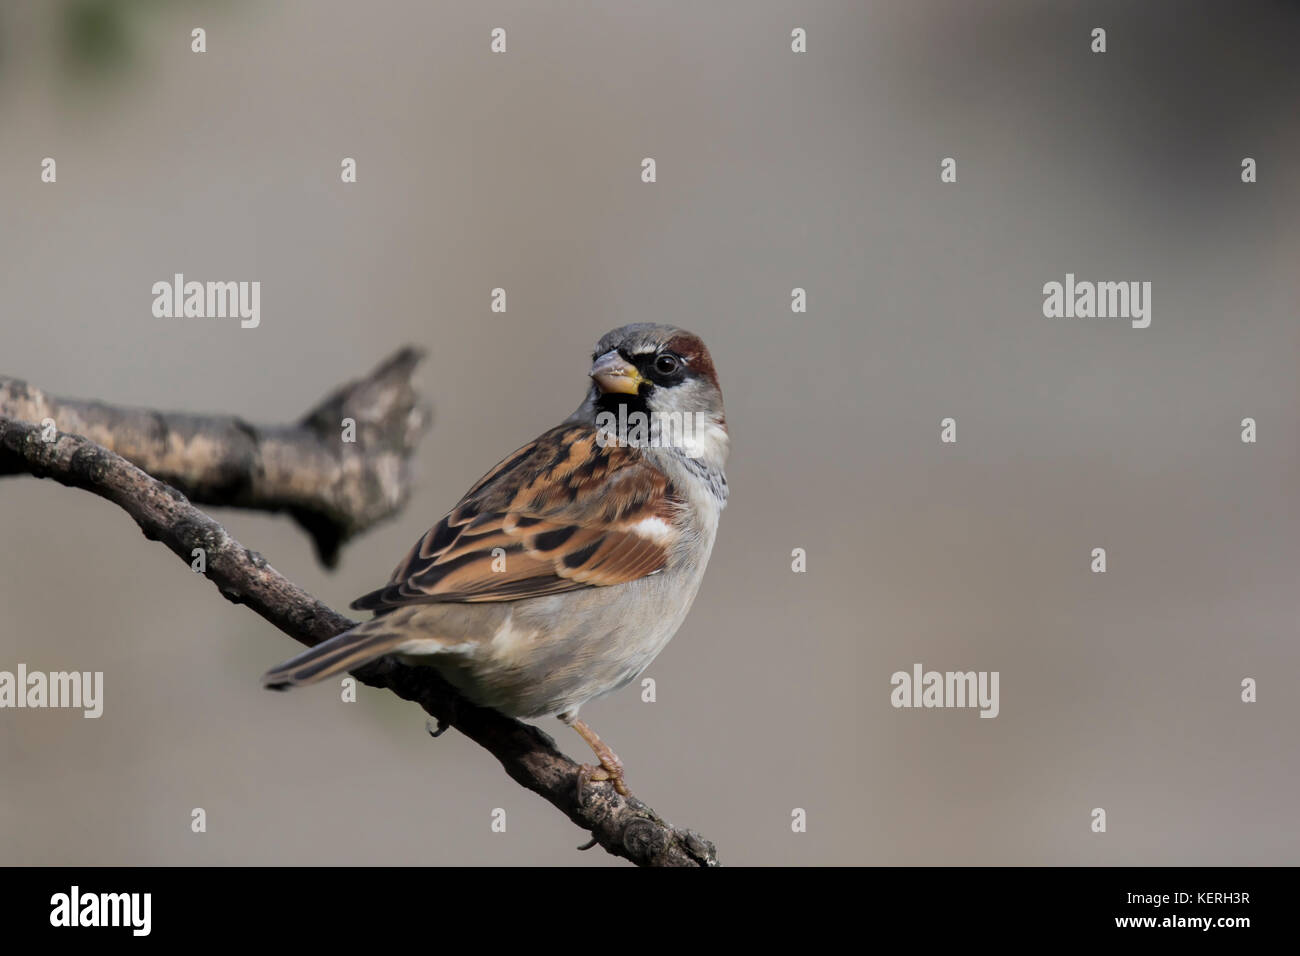 A little sparrow sitting on a Branch looking back at me. Stock Photo